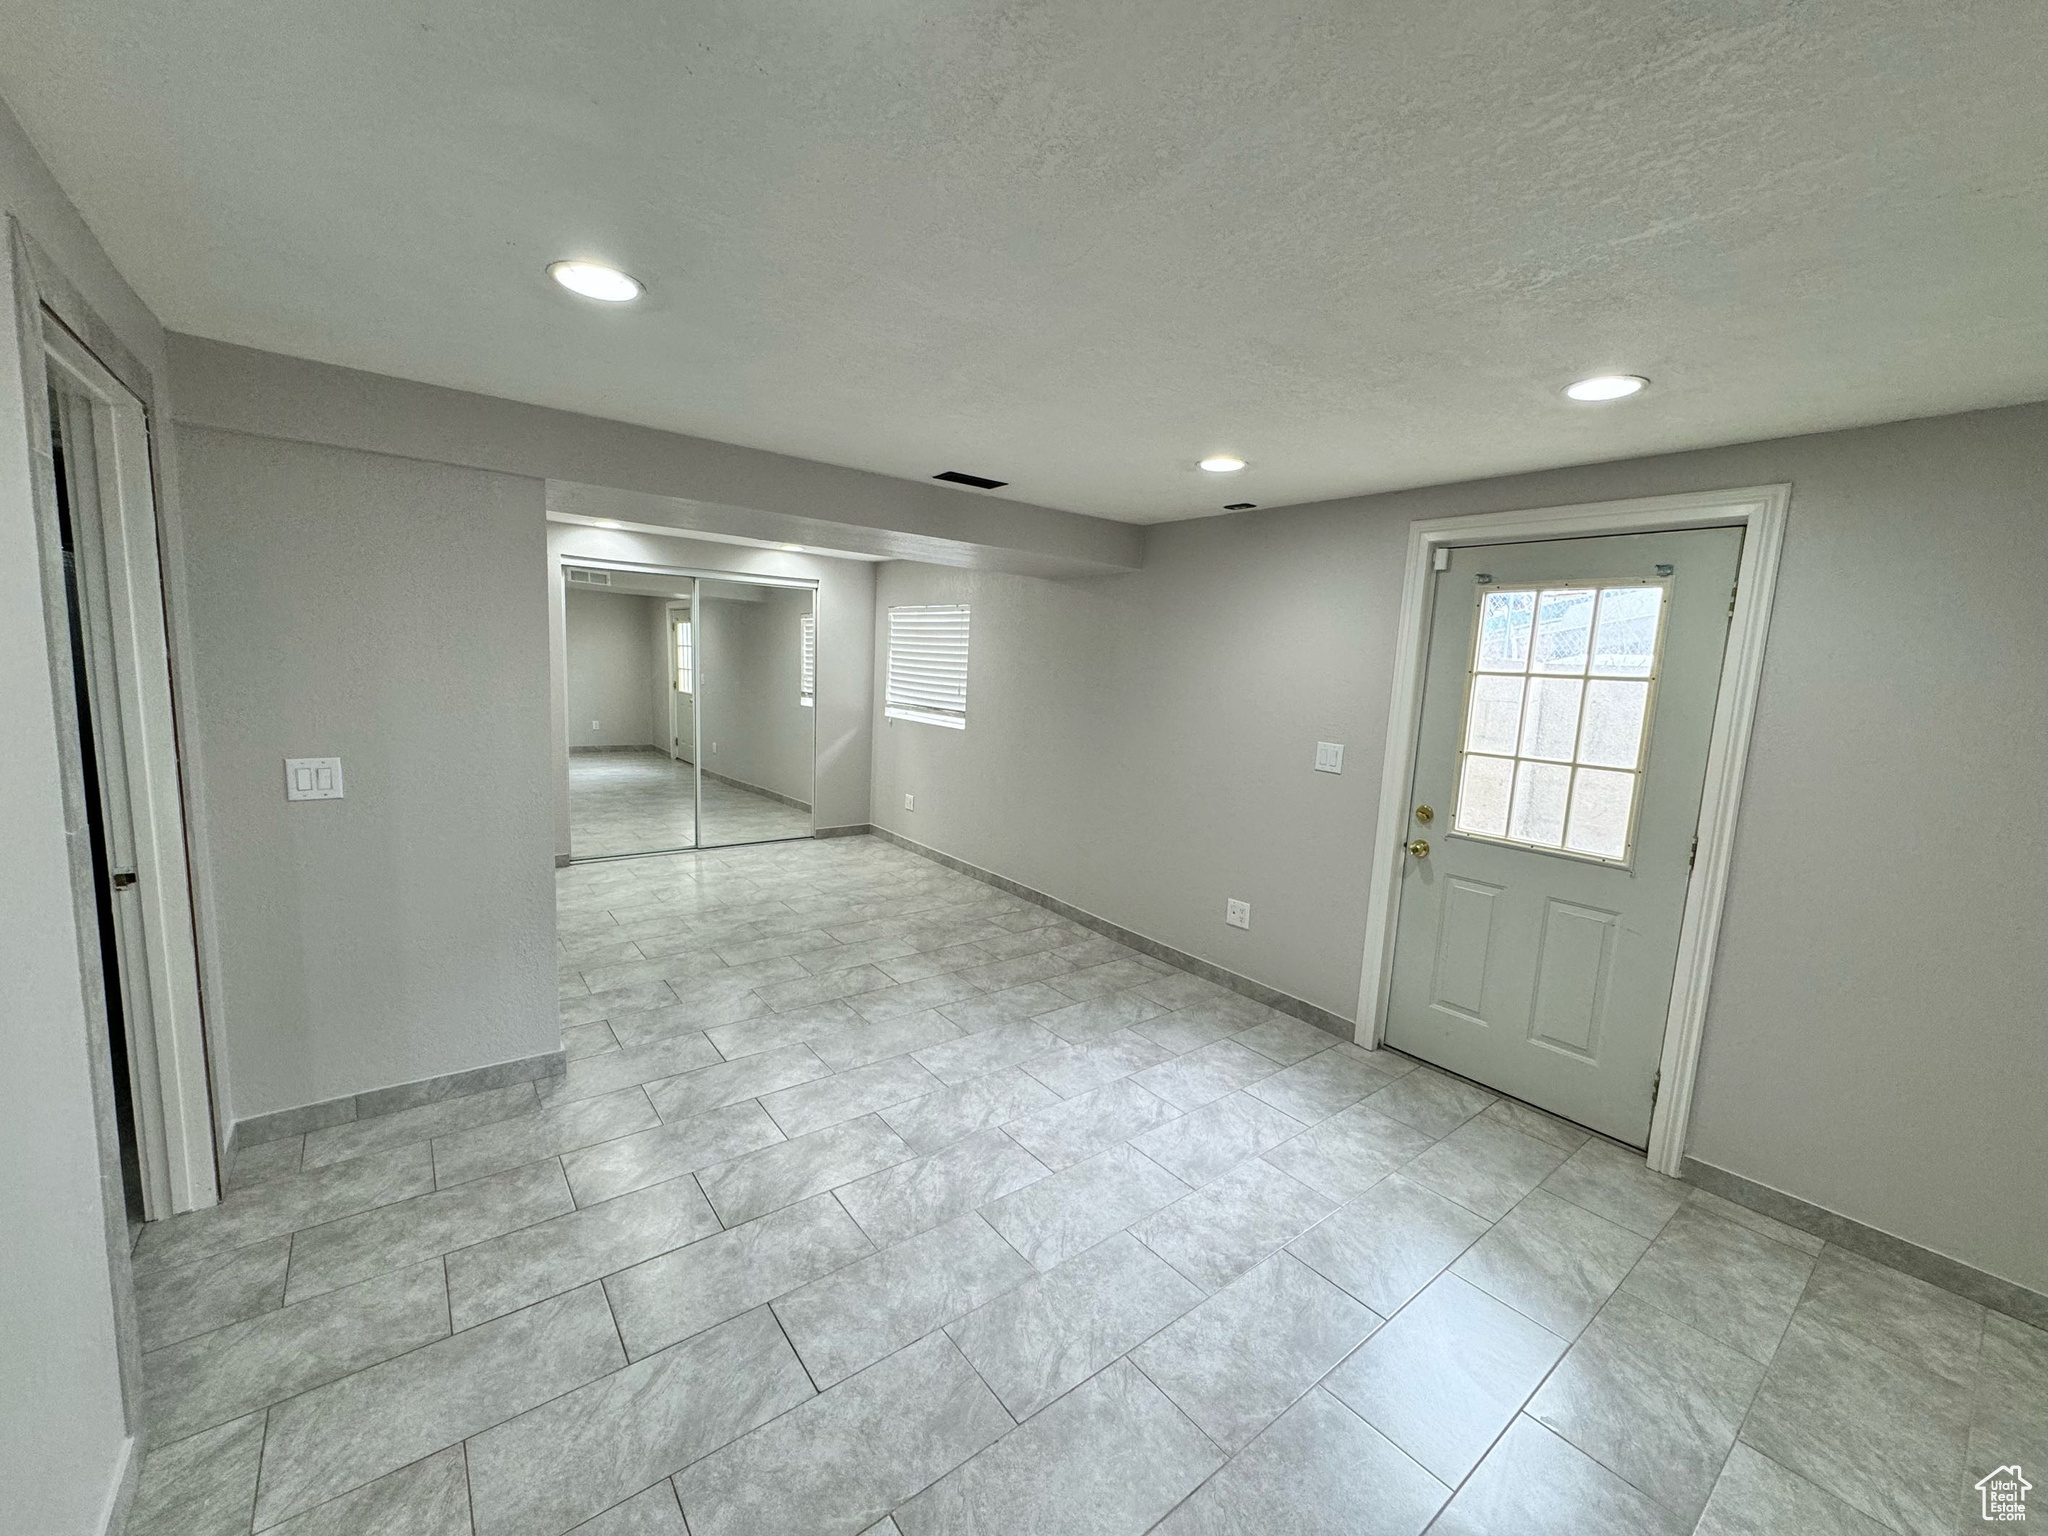 Empty room featuring a textured ceiling and light tile floors